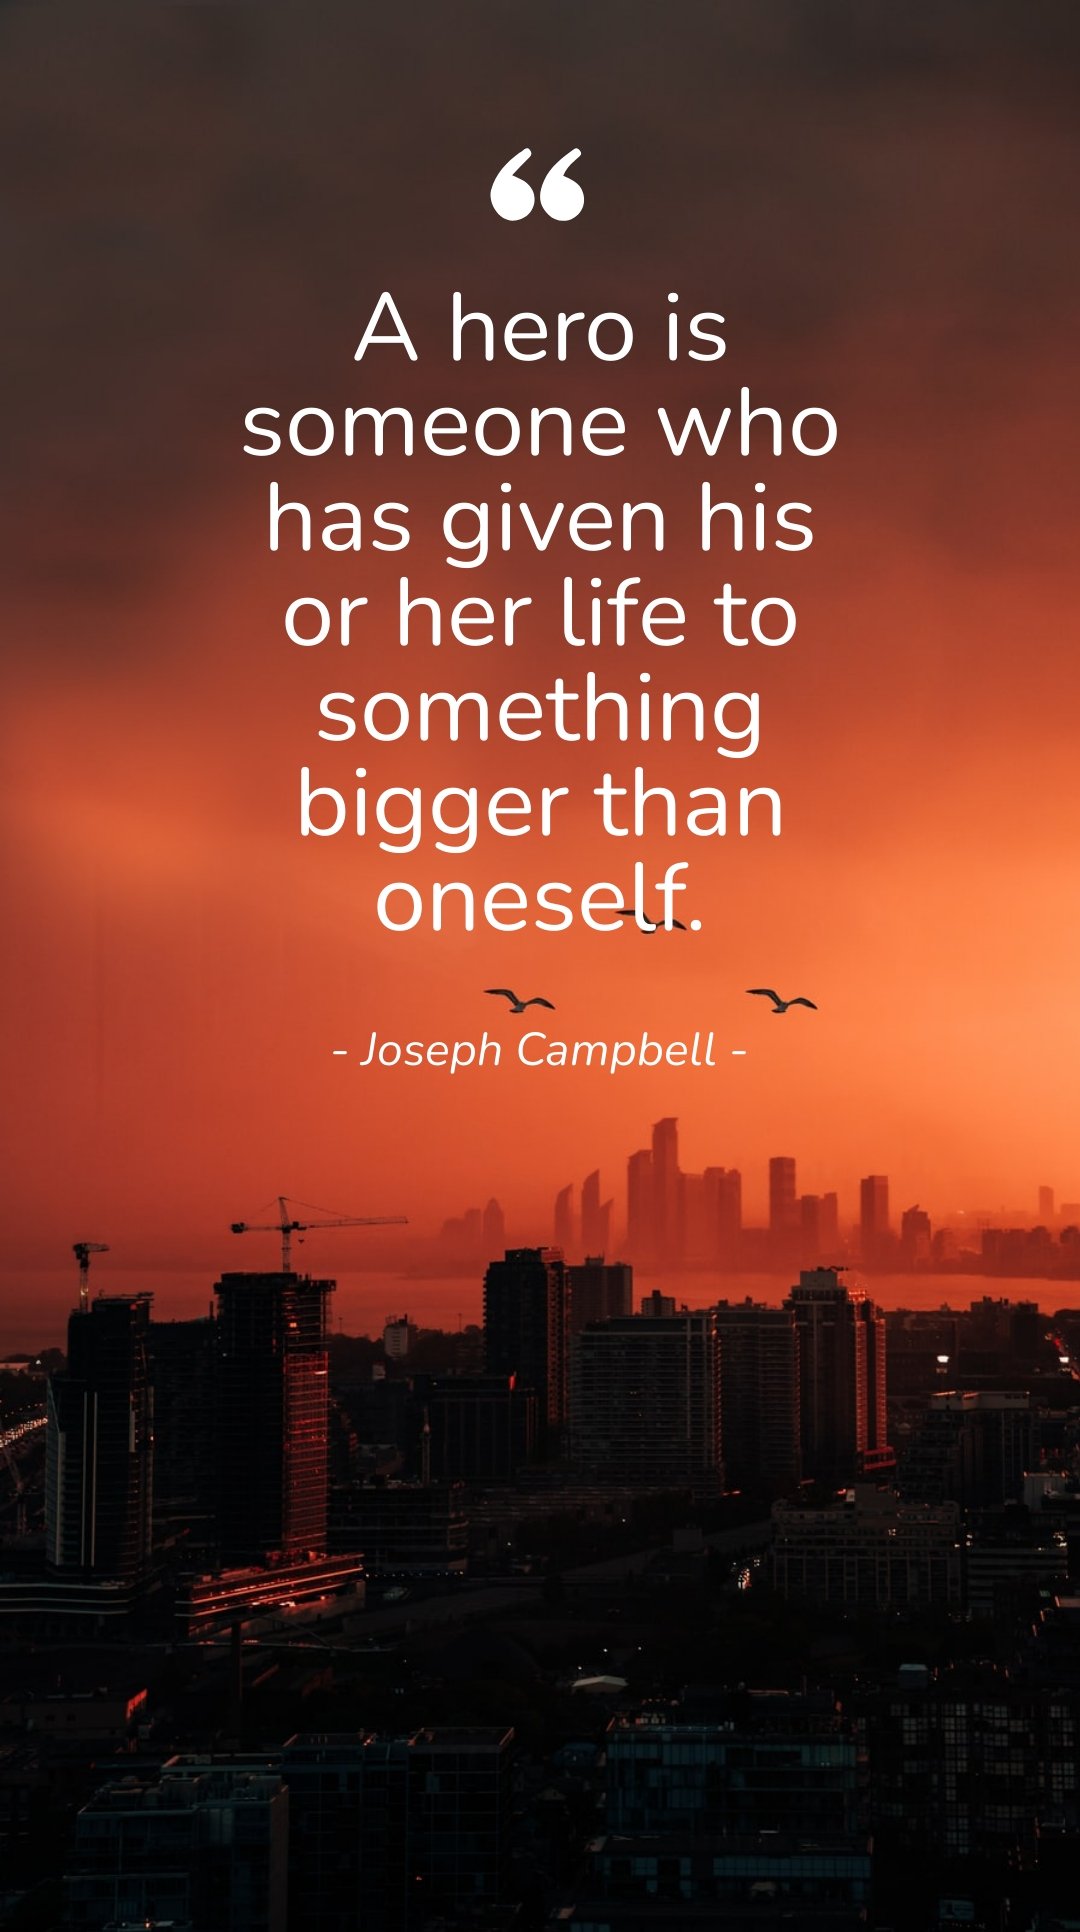 Free Joseph Campbell - "A hero is someone who has given his or her life to something bigger than oneself." in JPG